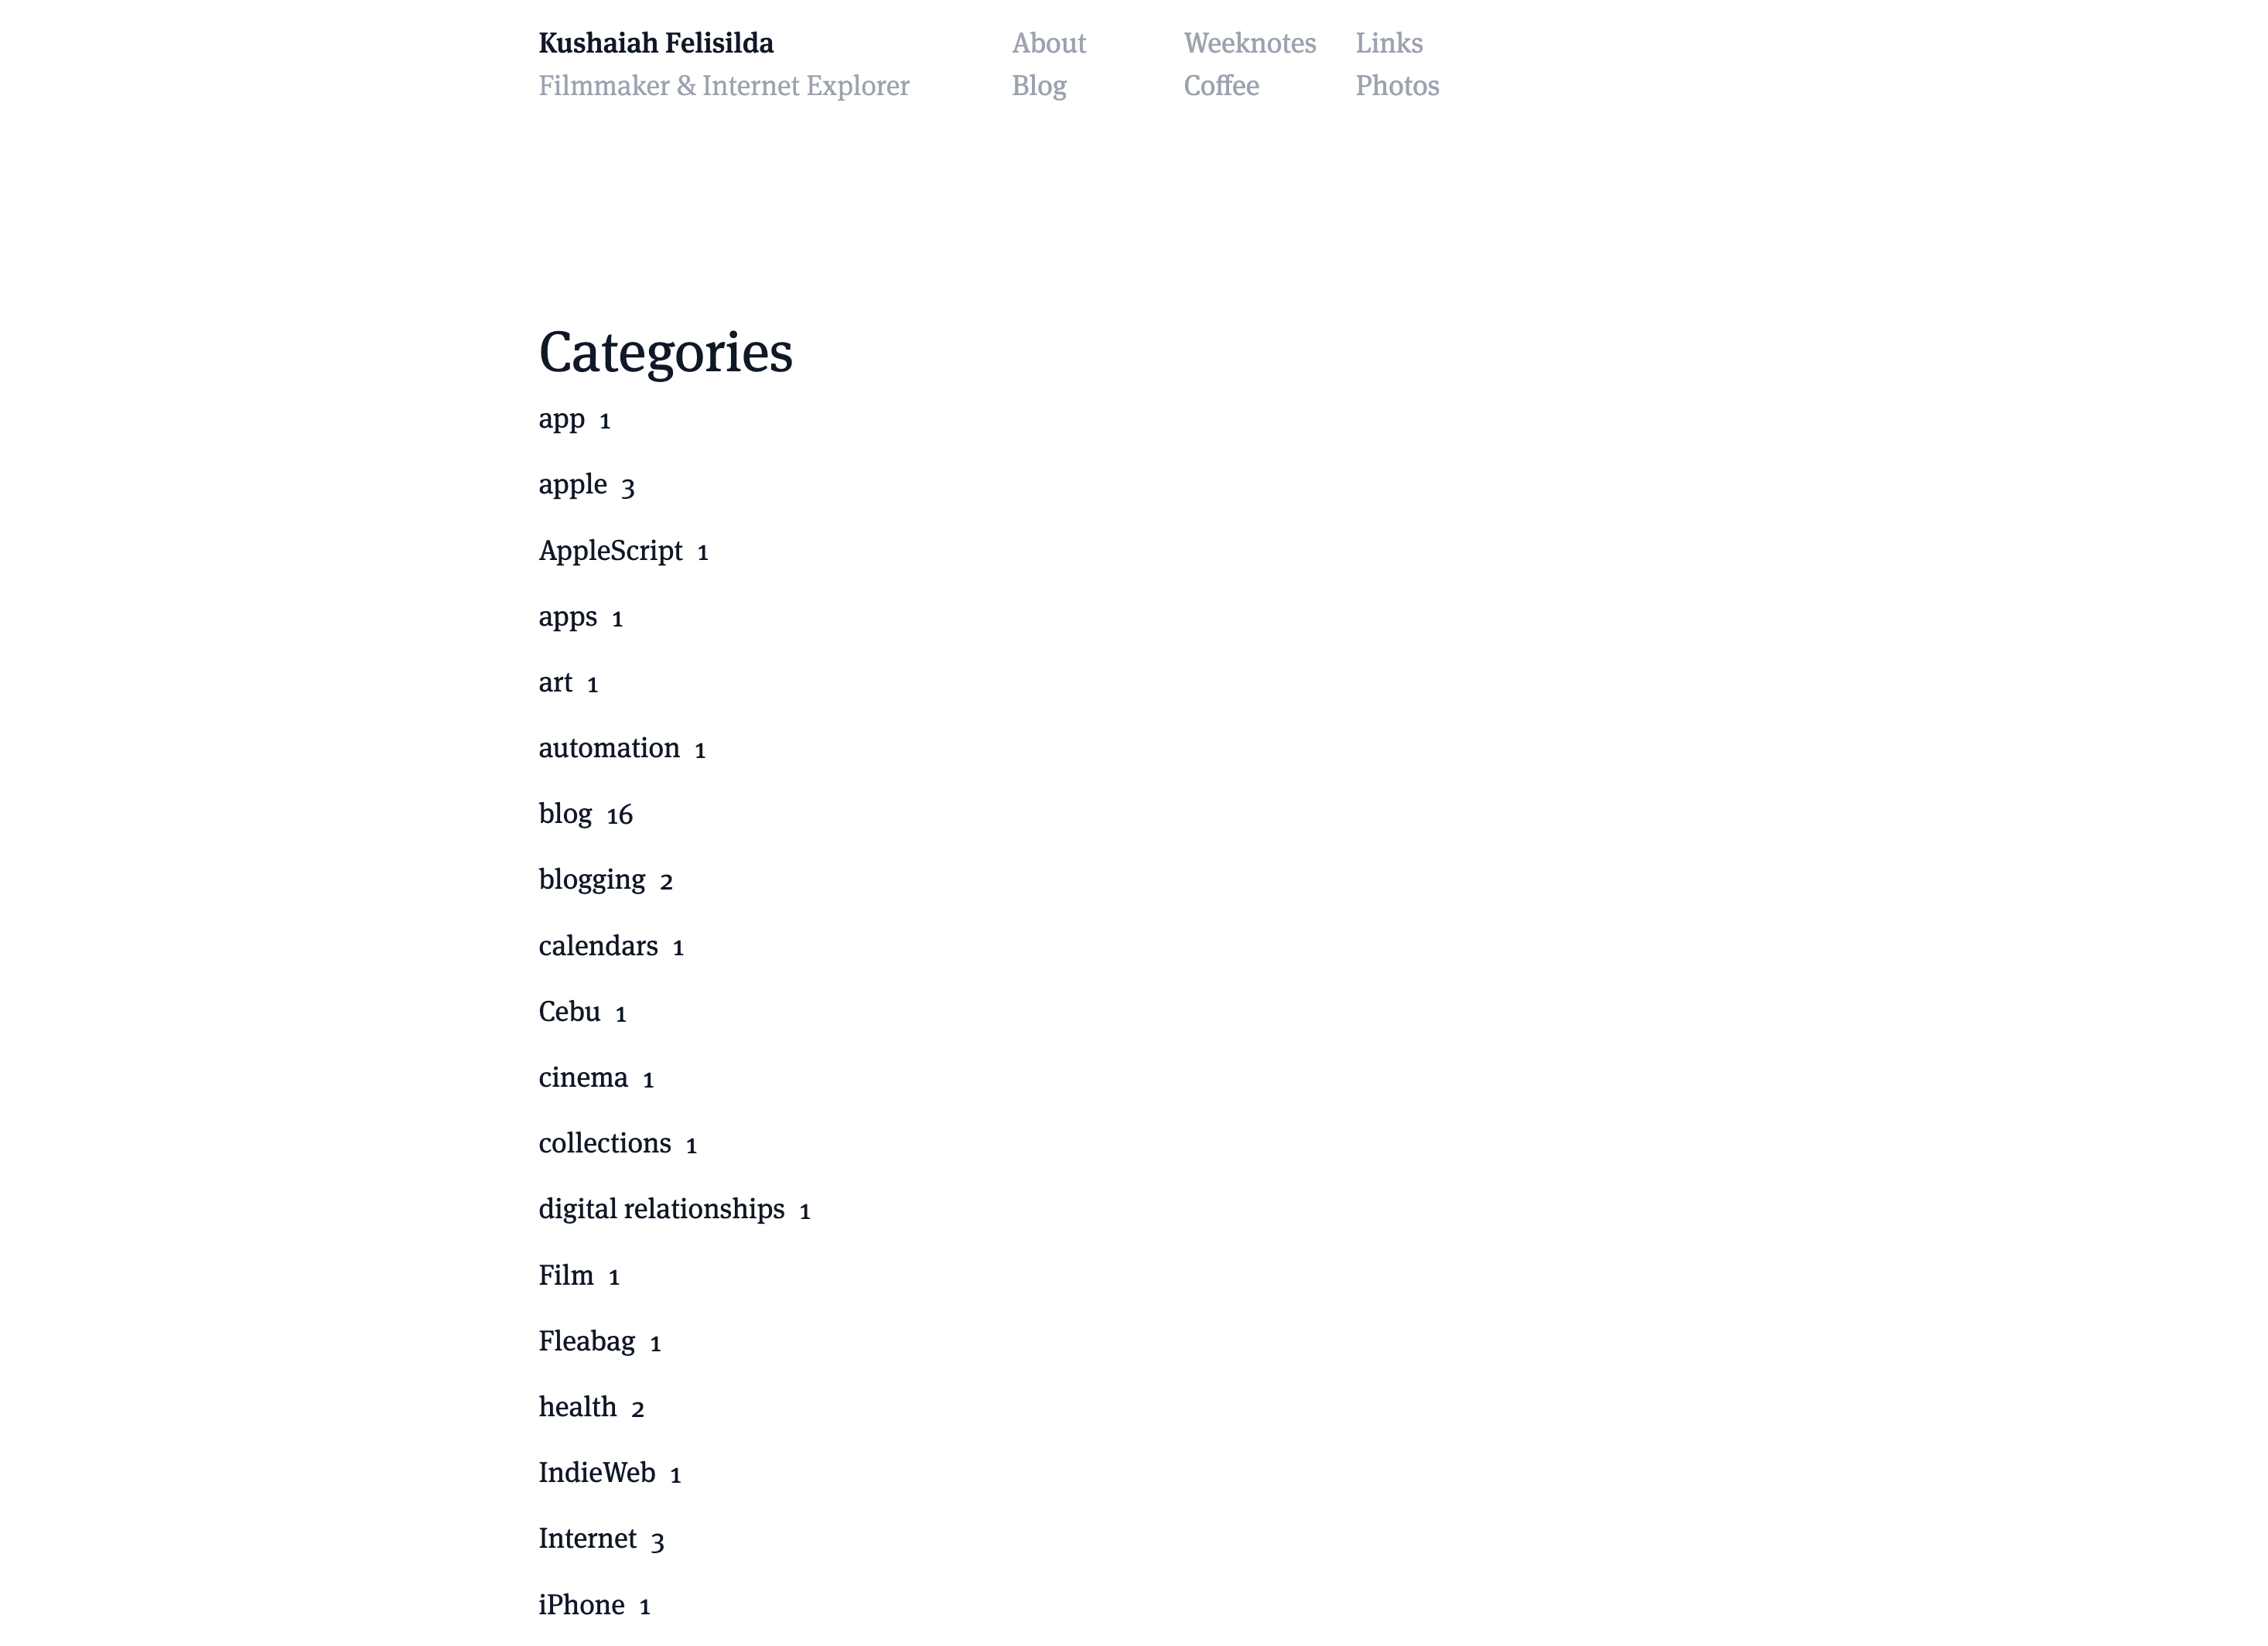 Categories page on my website